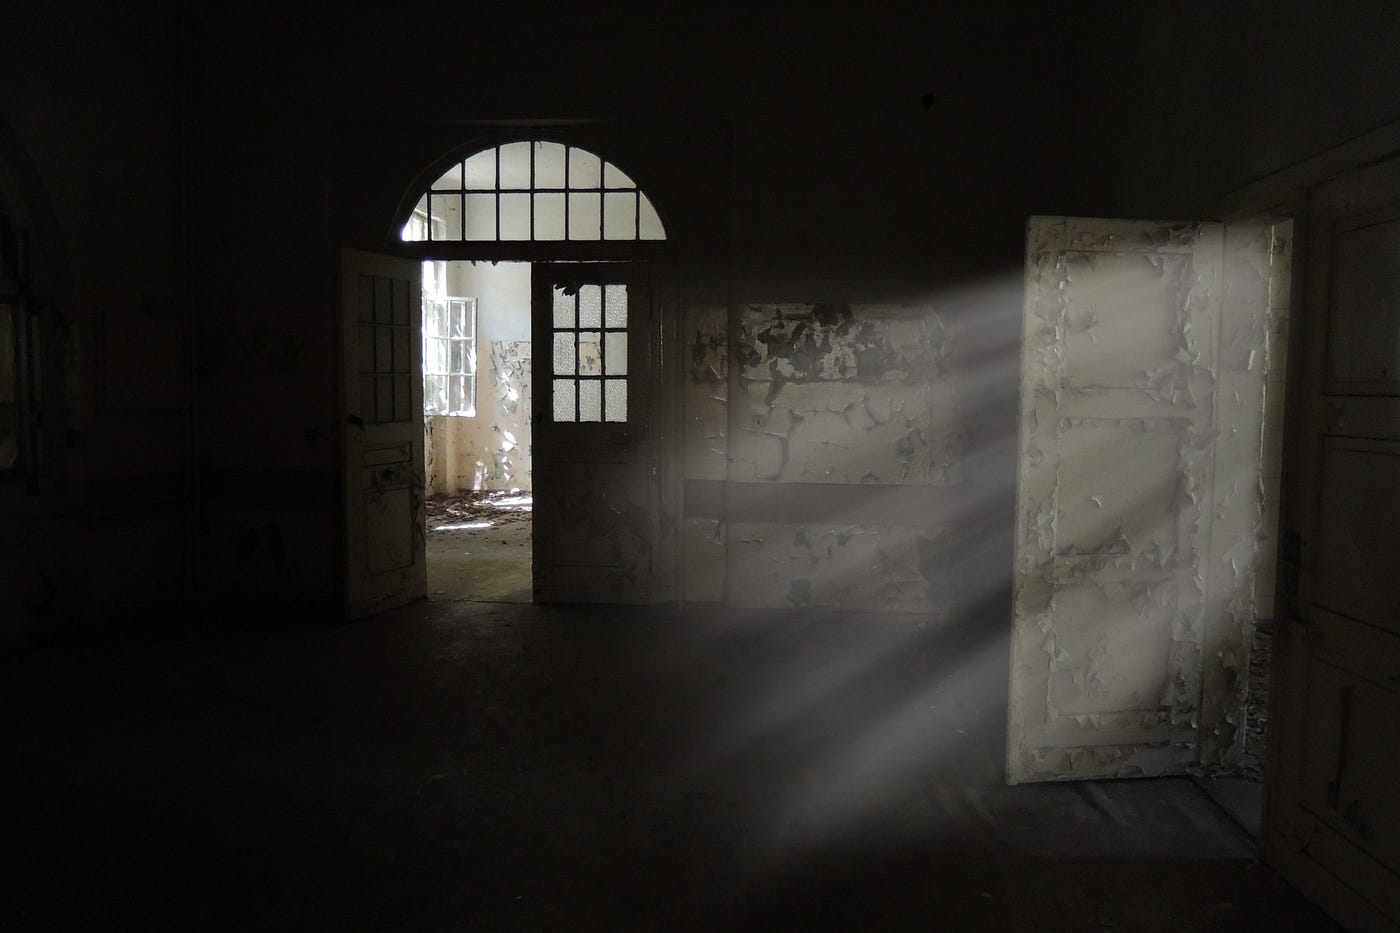 A dark, deserted room is lit up by shafts of sunlight through a doorway. The walls are peeling, and through another door we can see a similar room, also lit by dappled daylight.